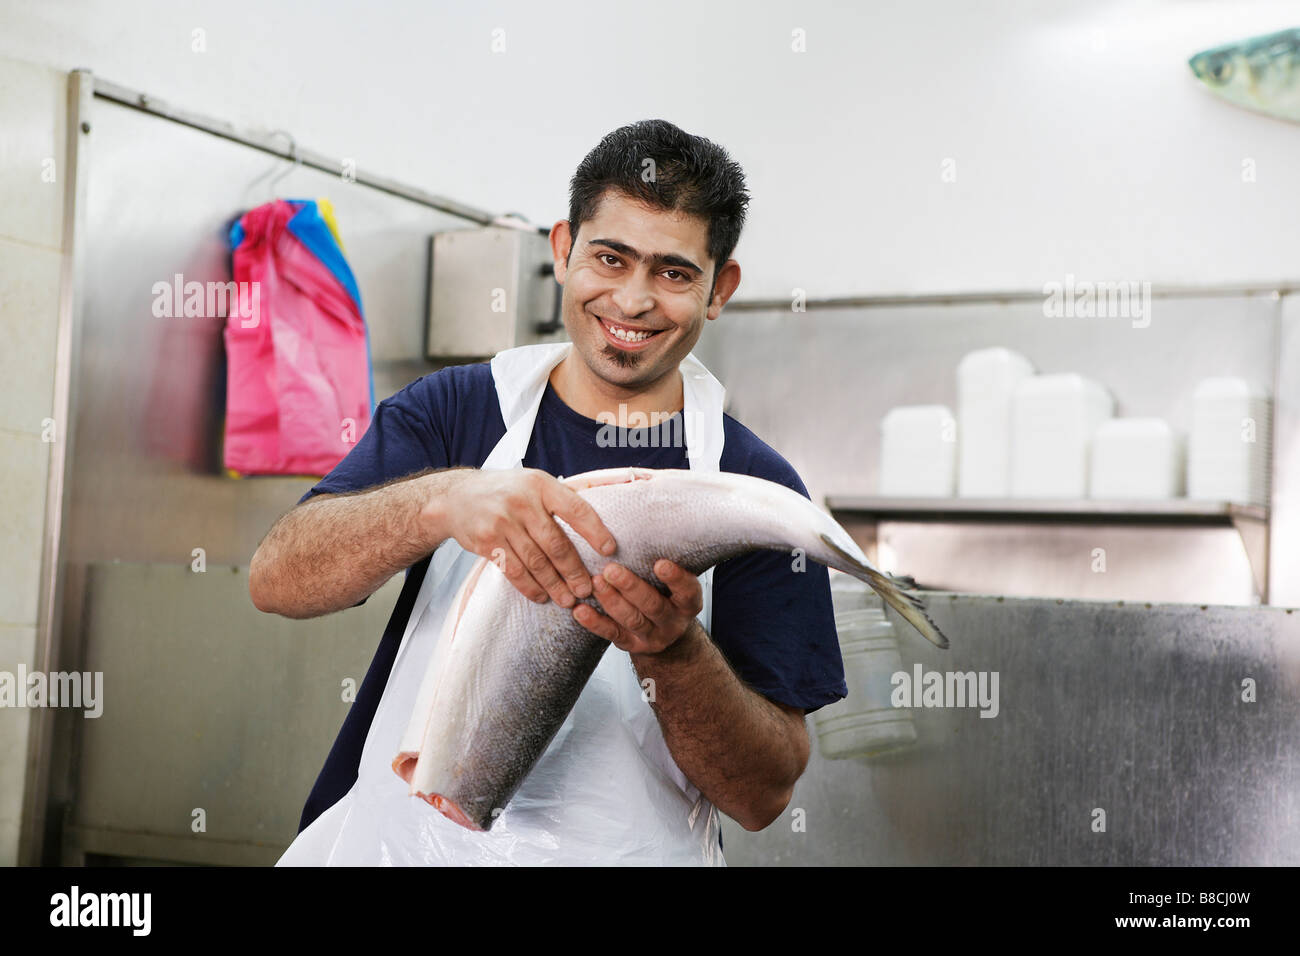 Butcher with Fresh Fish Stock Photo